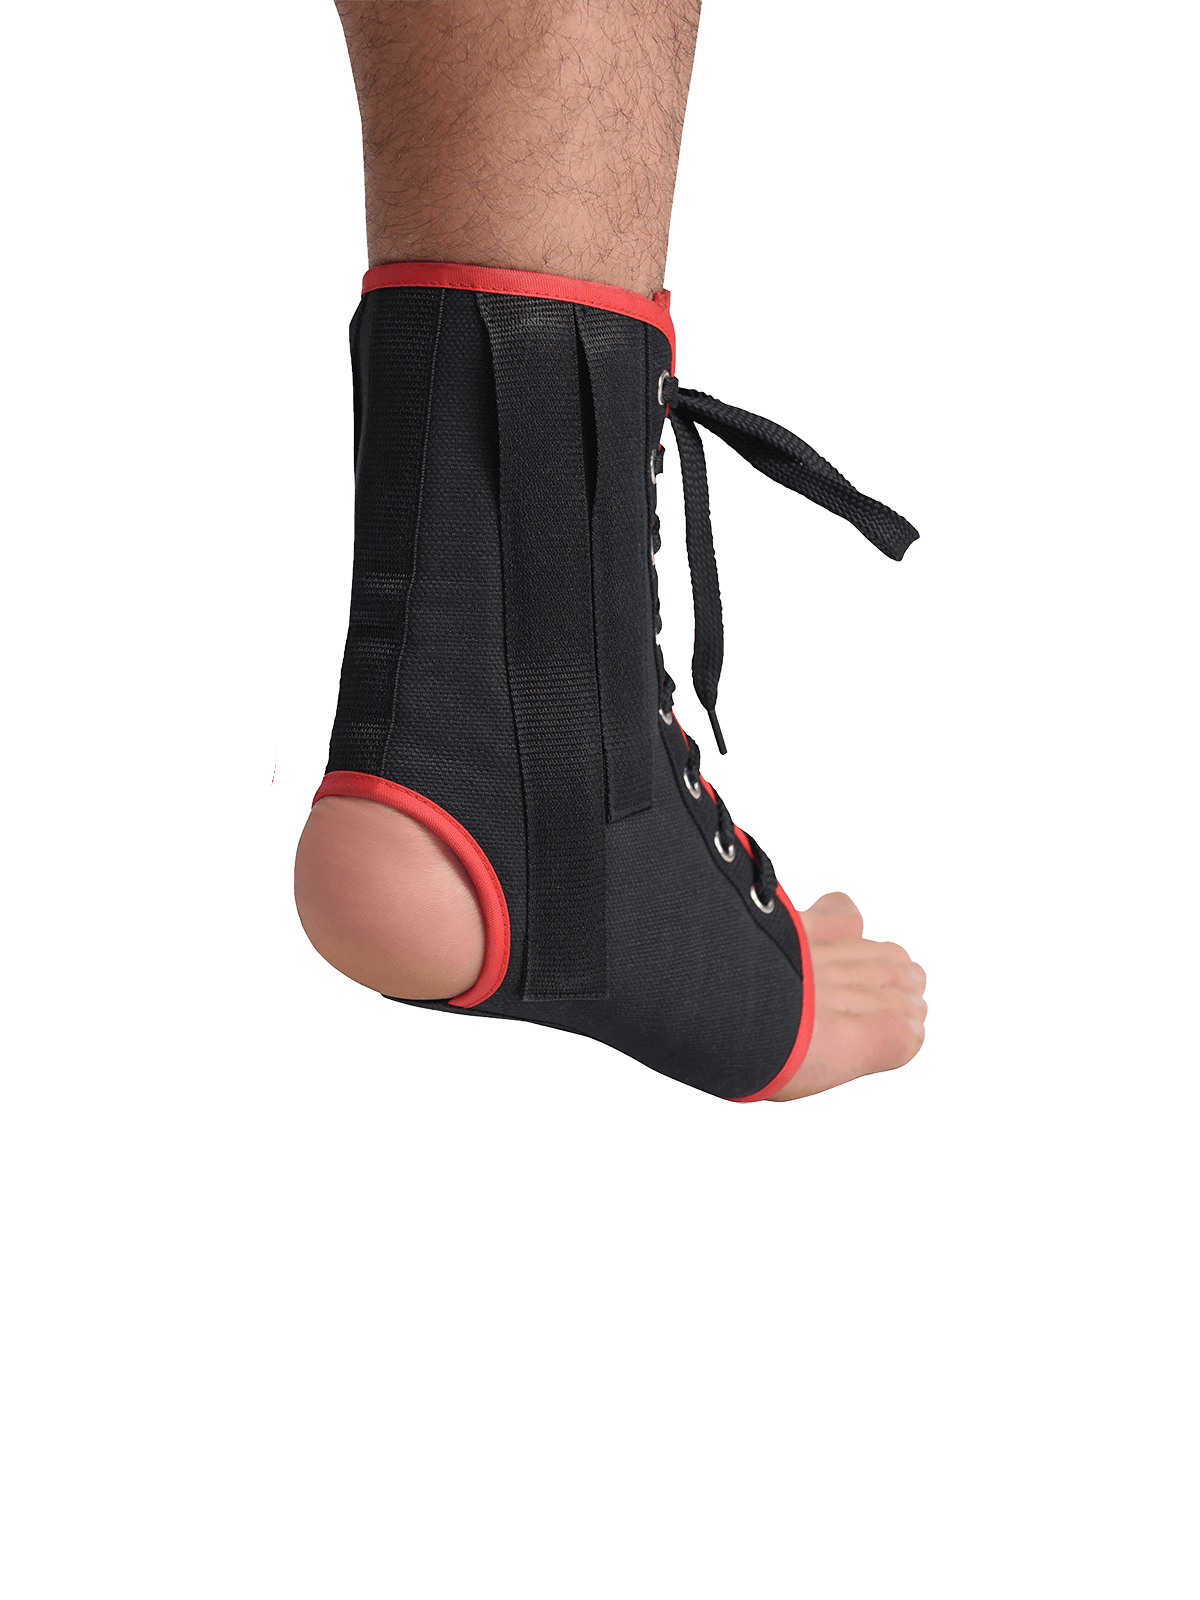 Ankle Support, Velpeau Maxar Foam and Terry Cotton Ankle Guard